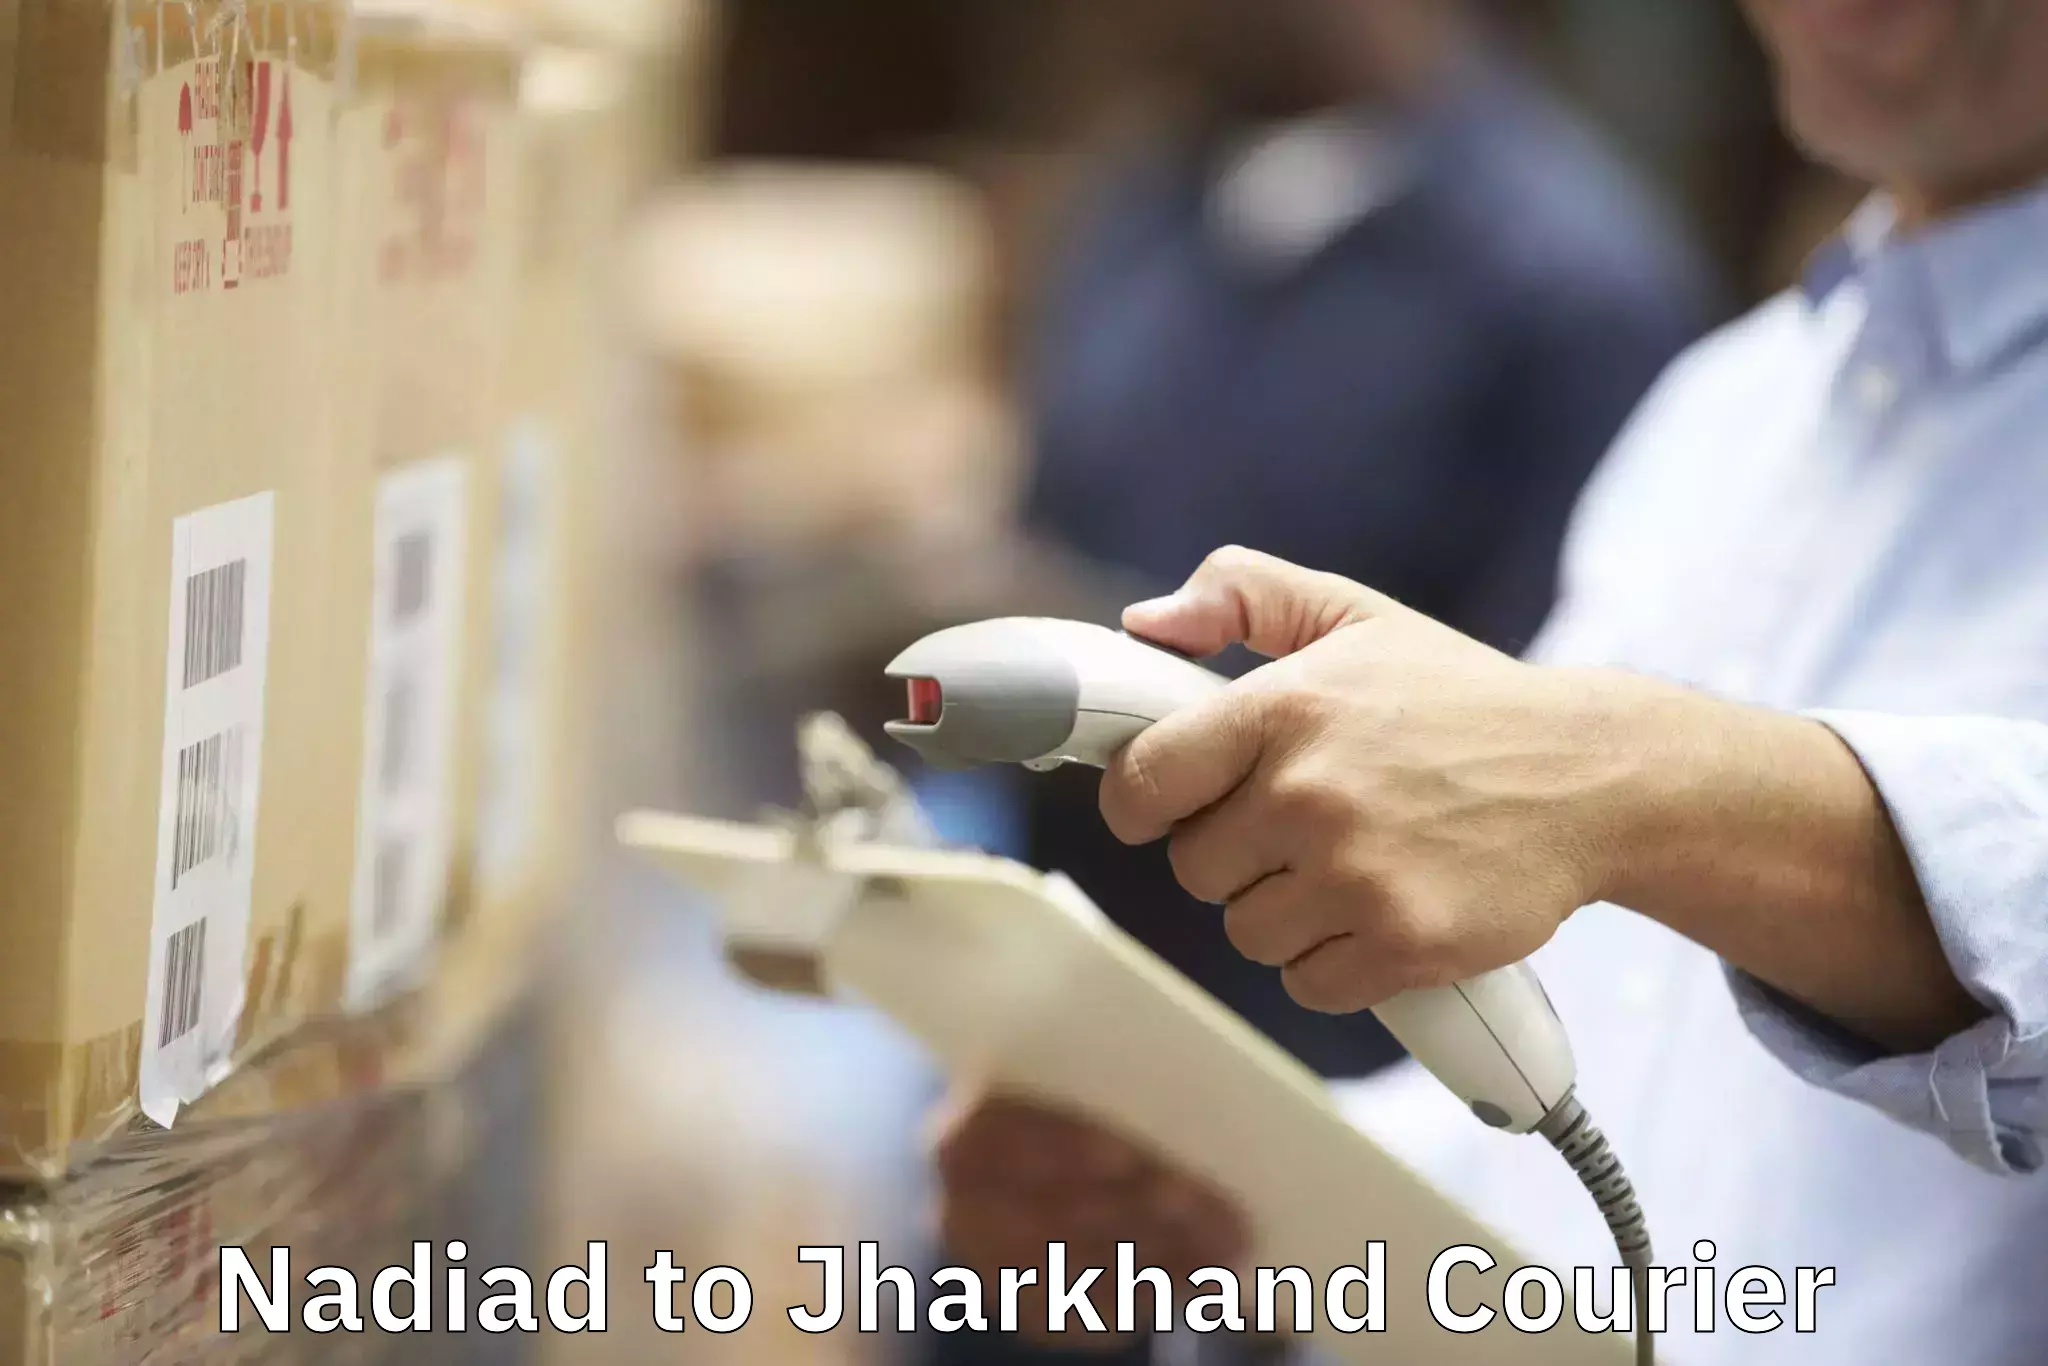 Furniture transport specialists Nadiad to Jharkhand